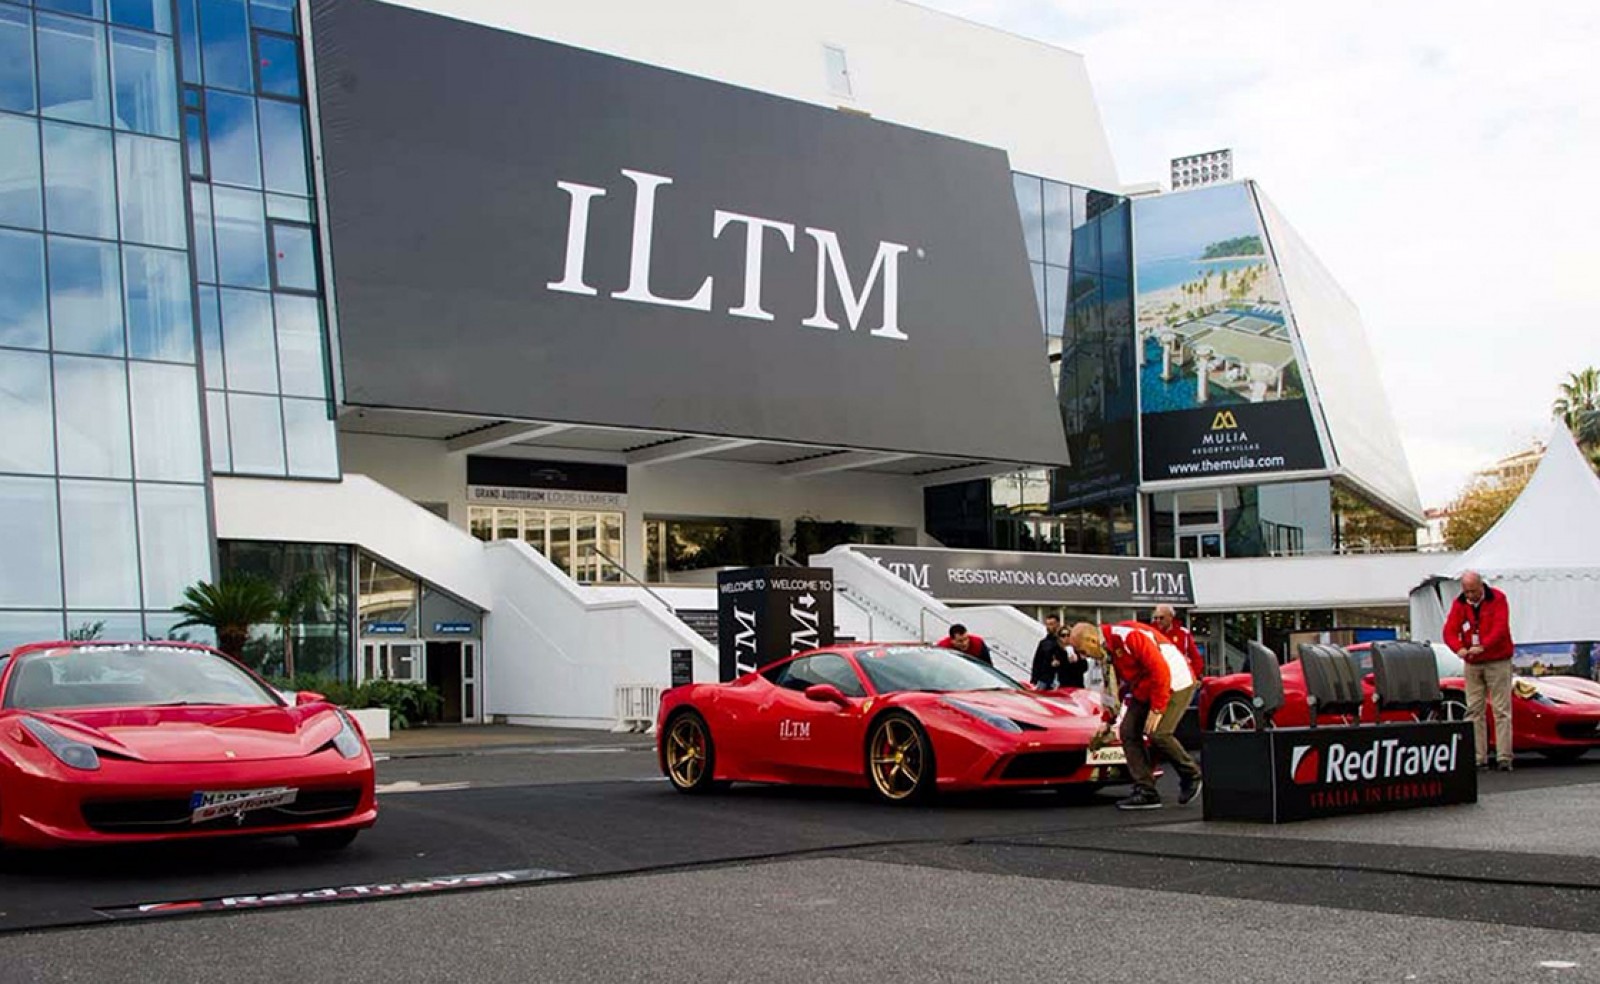 Private Chauffeur for ILTM Event in Cannes - Premium Vehicles & Services - Reactivity 24/7 - Ruby Services - Car Rental with Driver for ILTM Event in Cannes